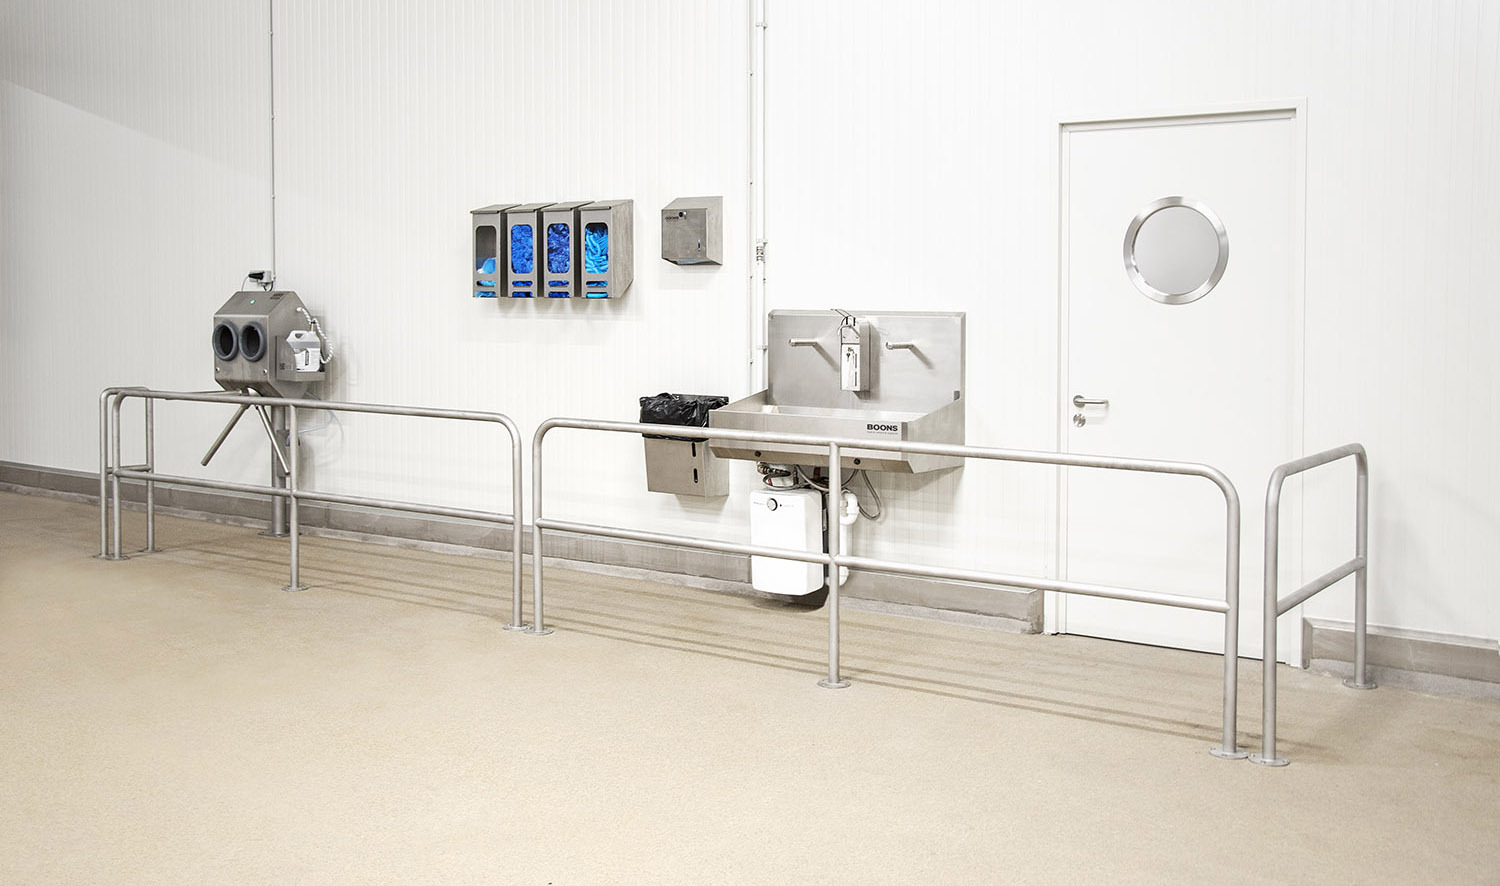 personal hygiene hand disinfection unit HDK hand washing trough stainless steel fencing accessories BoonsFIS